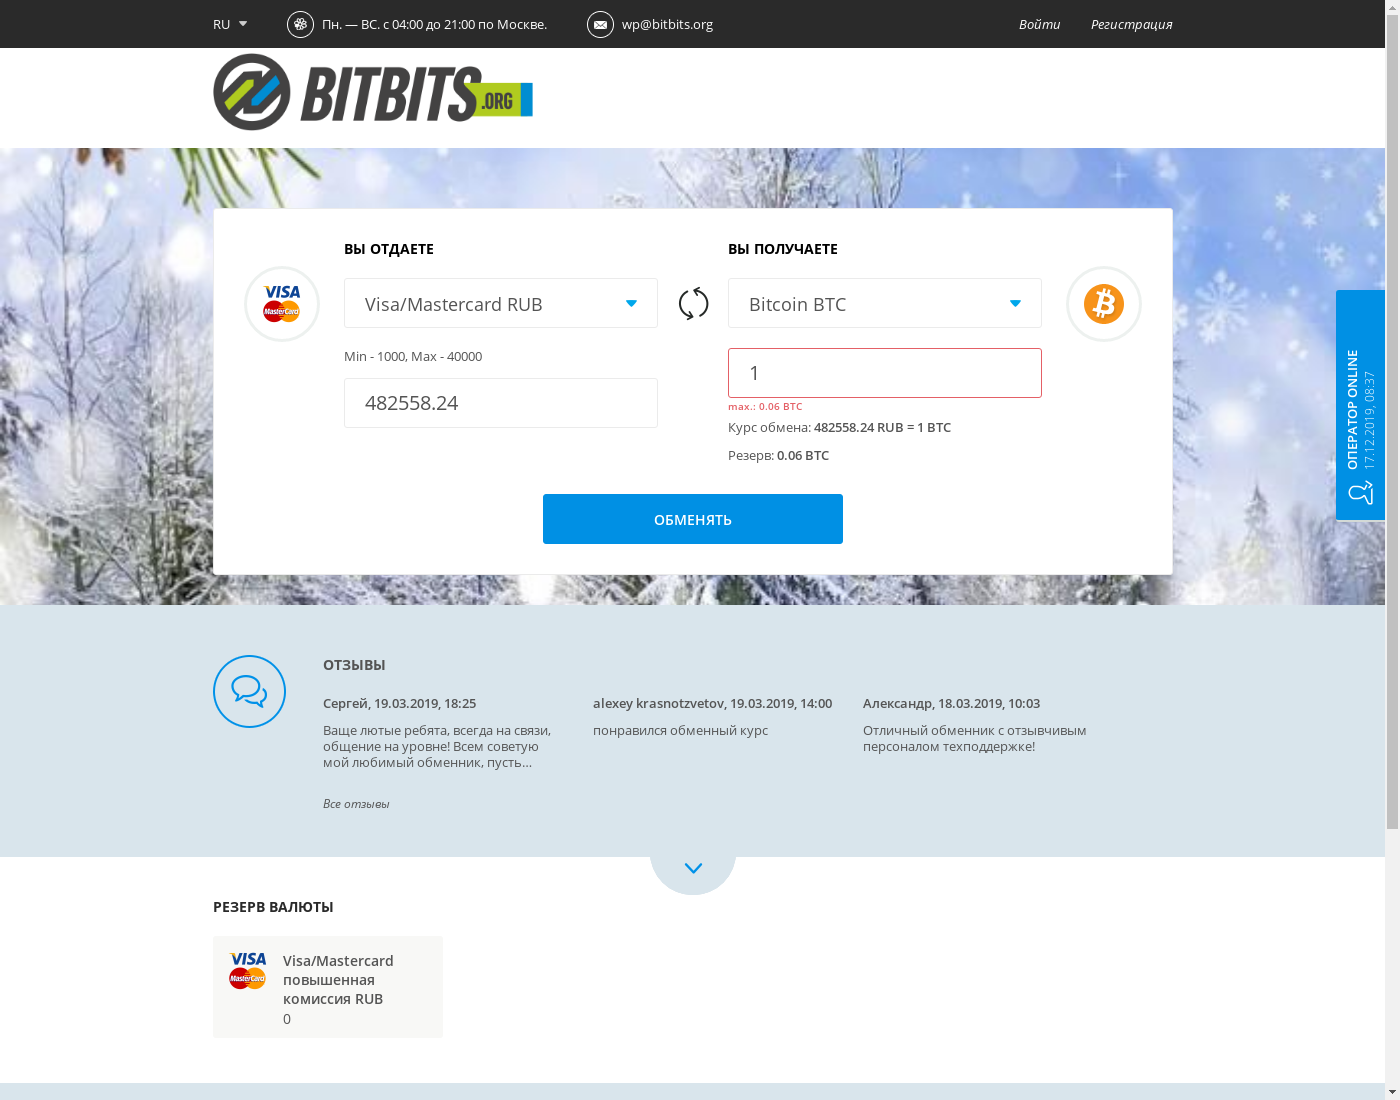 bitbits user interface: the home page in English